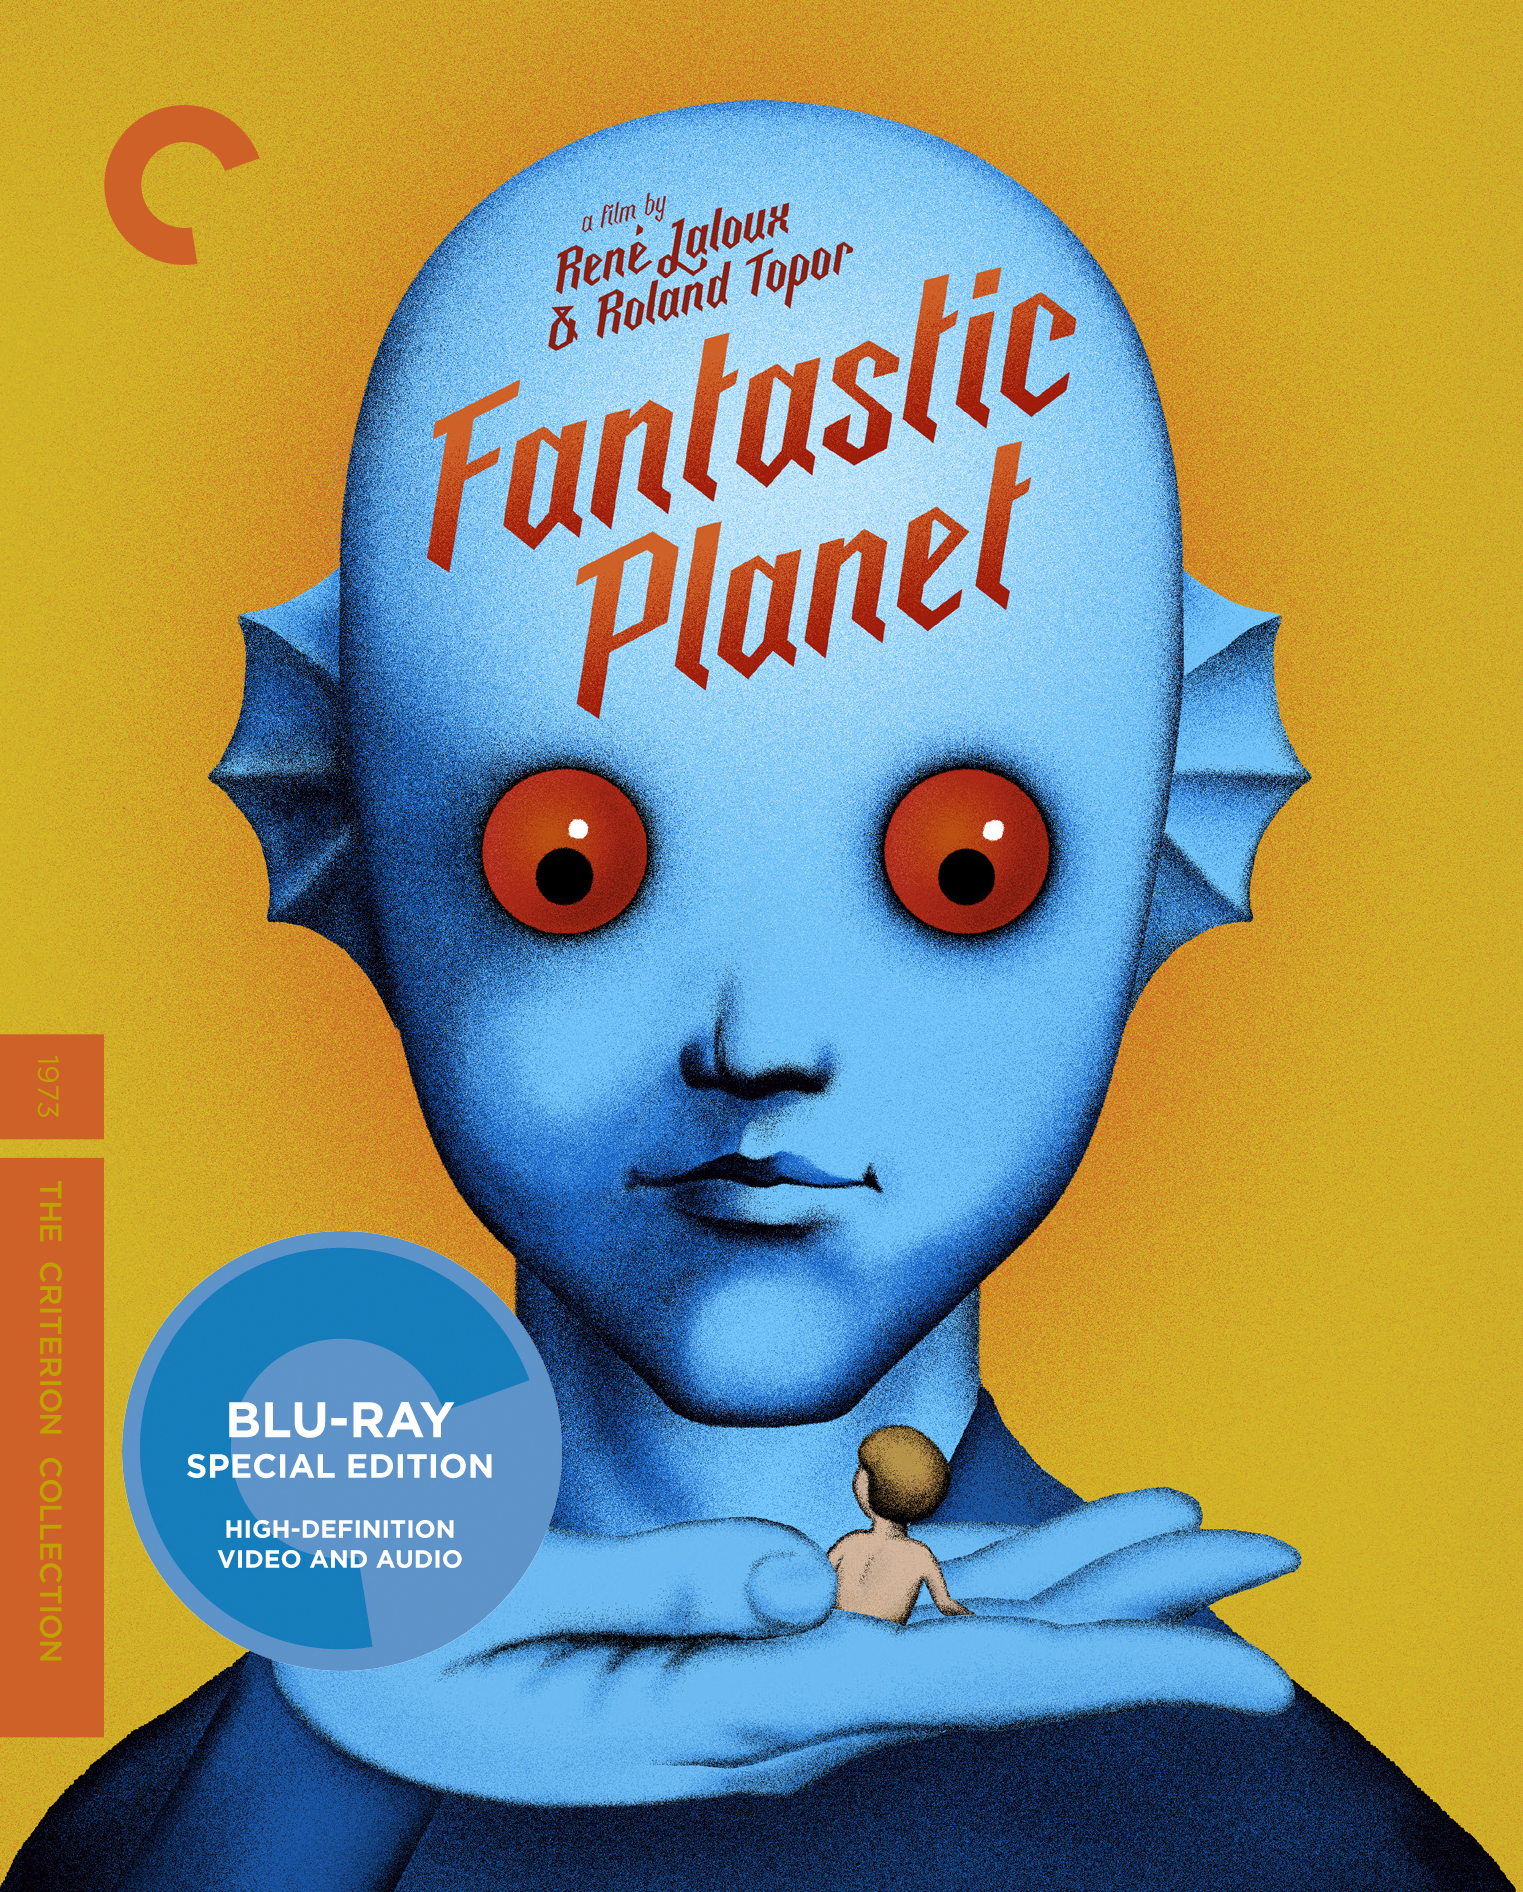 Fantastic Planet [Criterion Collection] [Blu-ray] [1973] - Best Buy